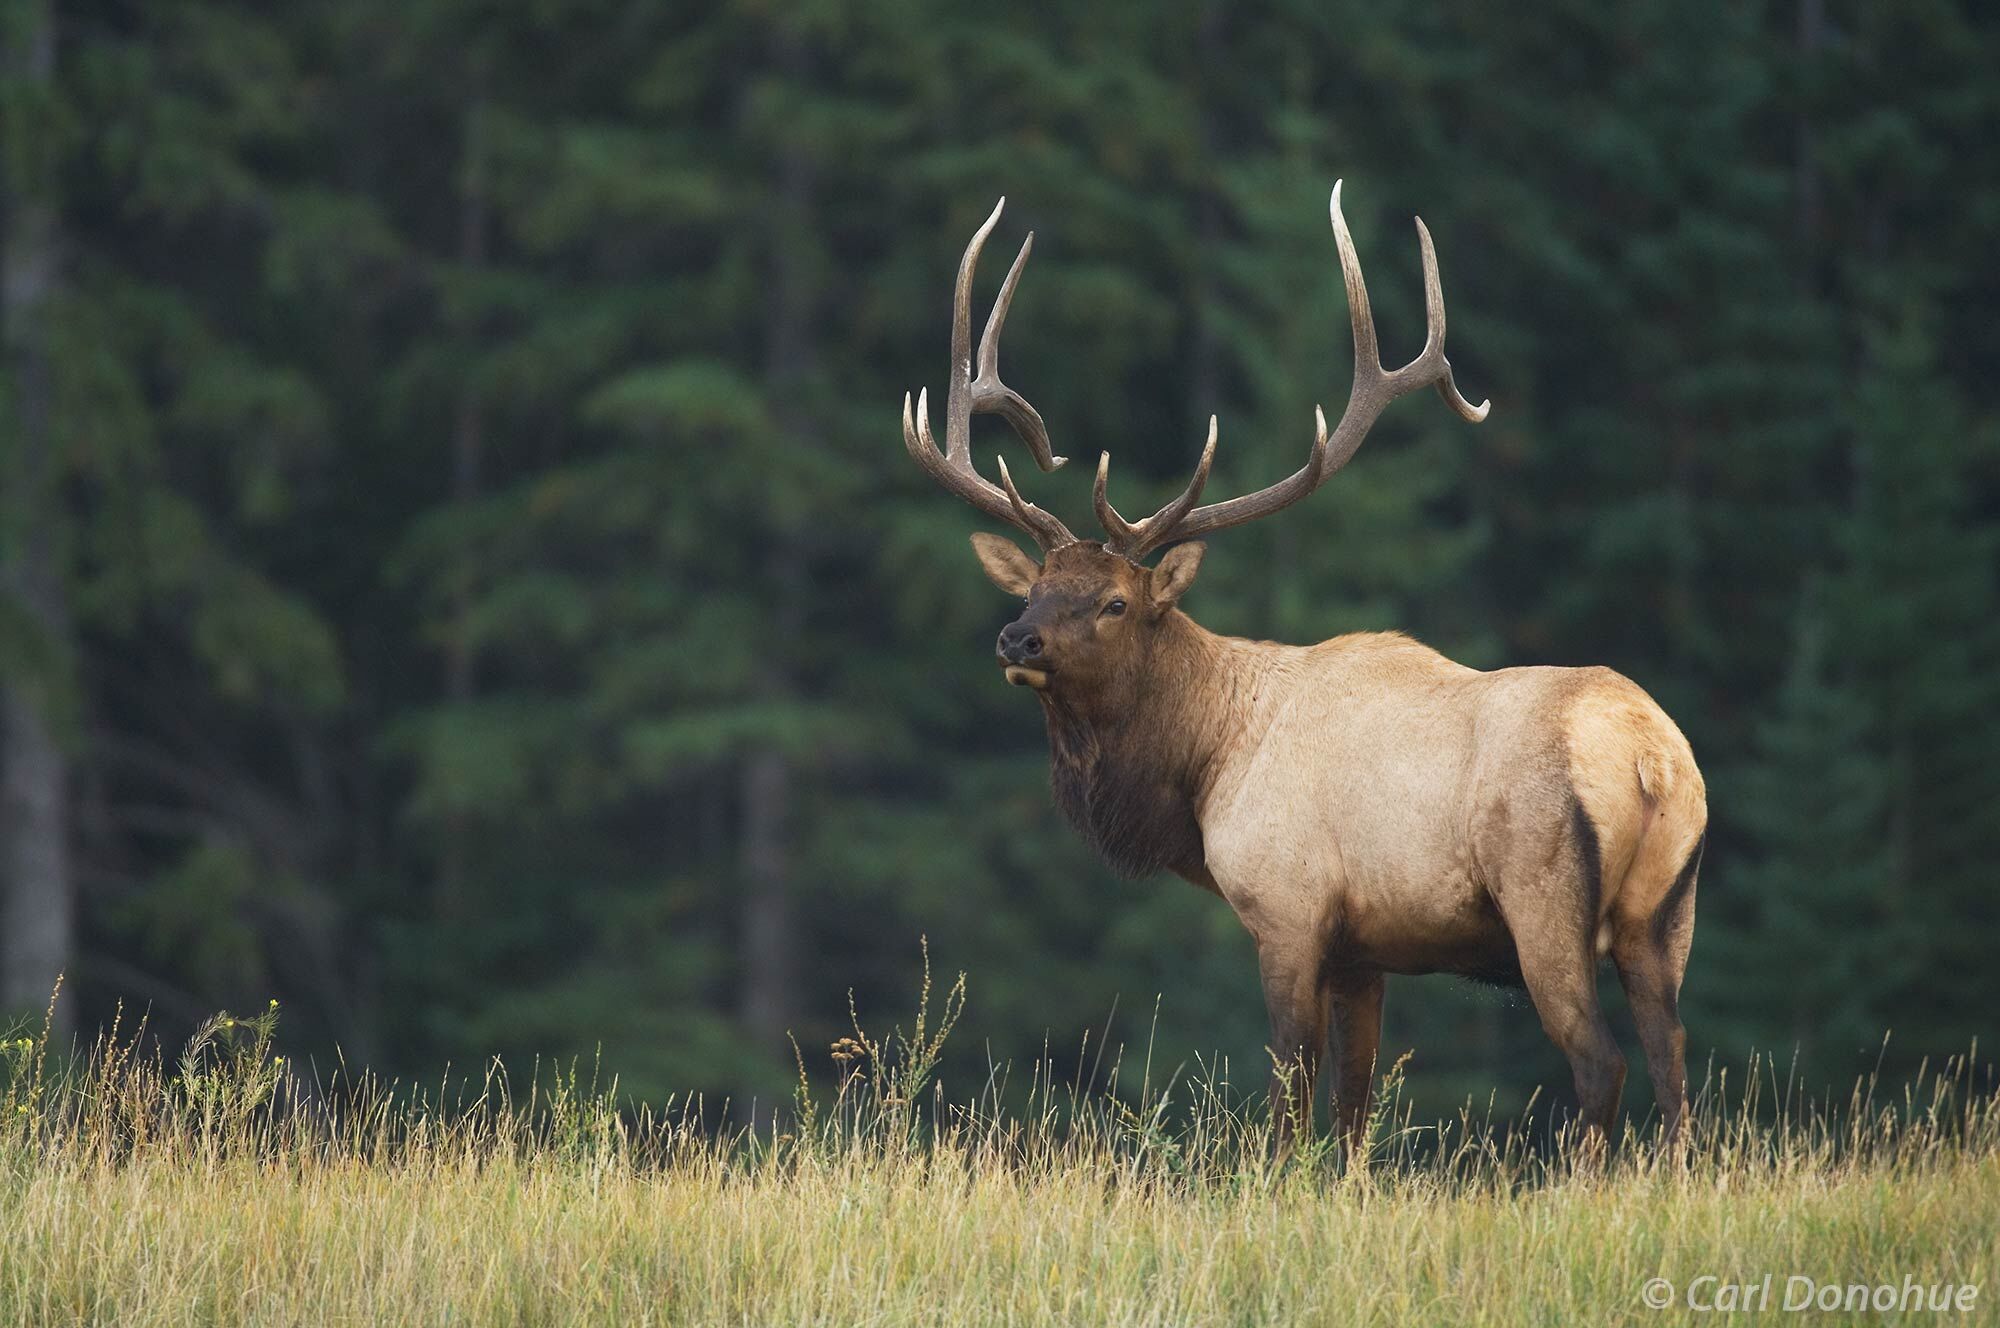 Bull elk, "wapiti", stands and watches in a small meadow during the fall rut, or breeding season rut, Canadian Rockies, Jasper...